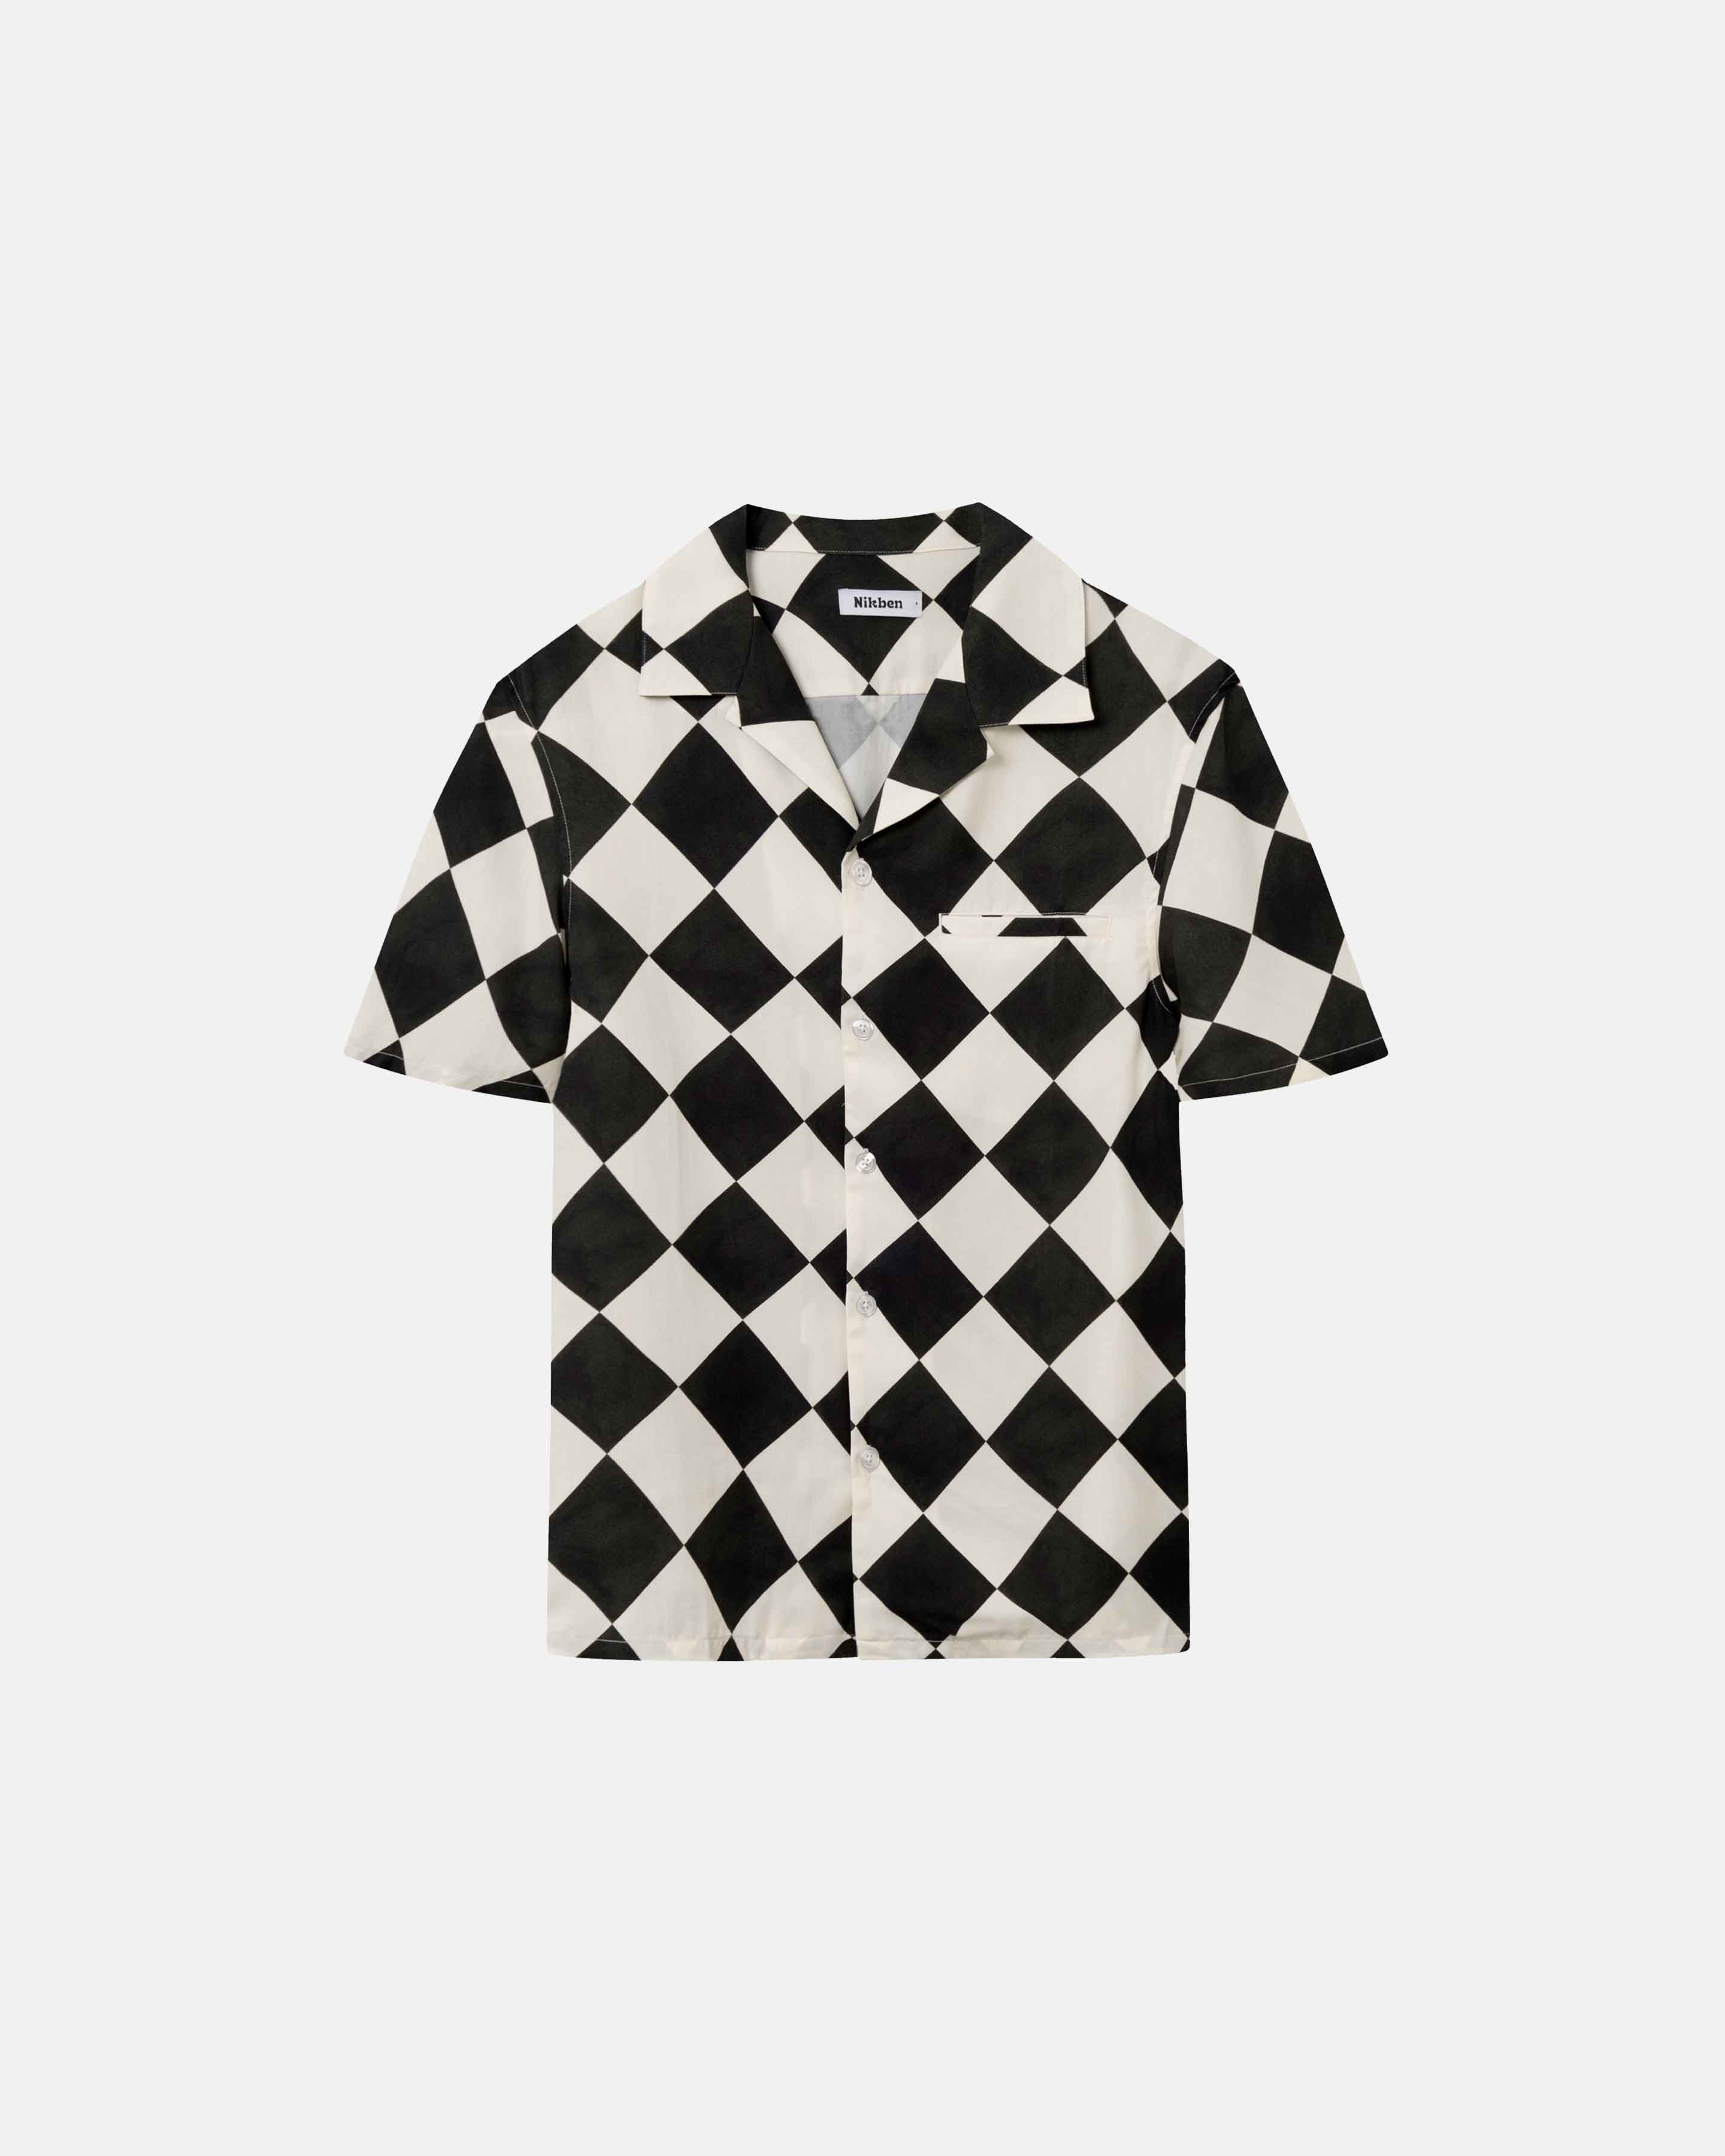 Short-sleeved vacation shirt with a black and white checkered pattern, open collar, one breast pocket, and button closure.